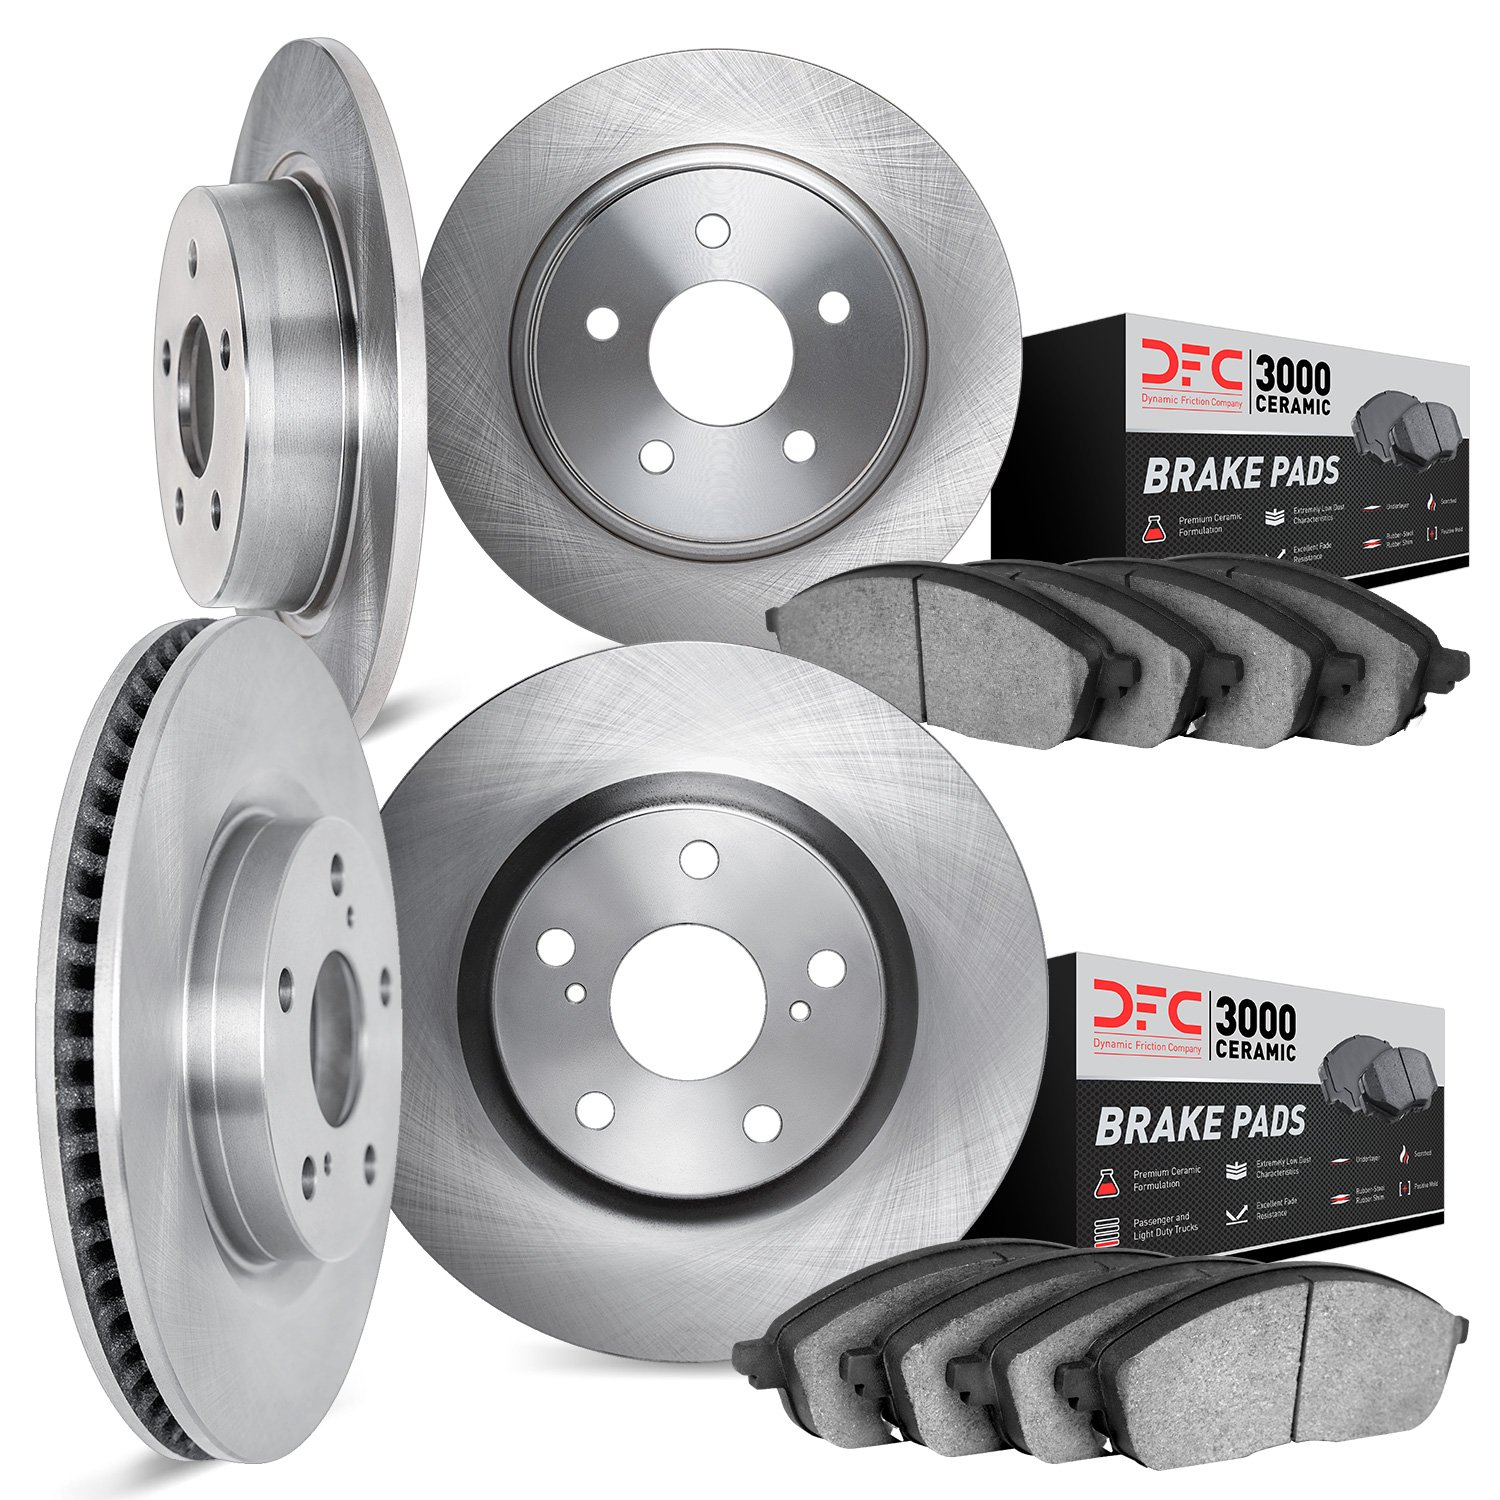 6304-76090 Brake Rotors with 3000-Series Ceramic Brake Pads Kit, 2012-2018 Lexus/Toyota/Scion, Position: Front and Rear